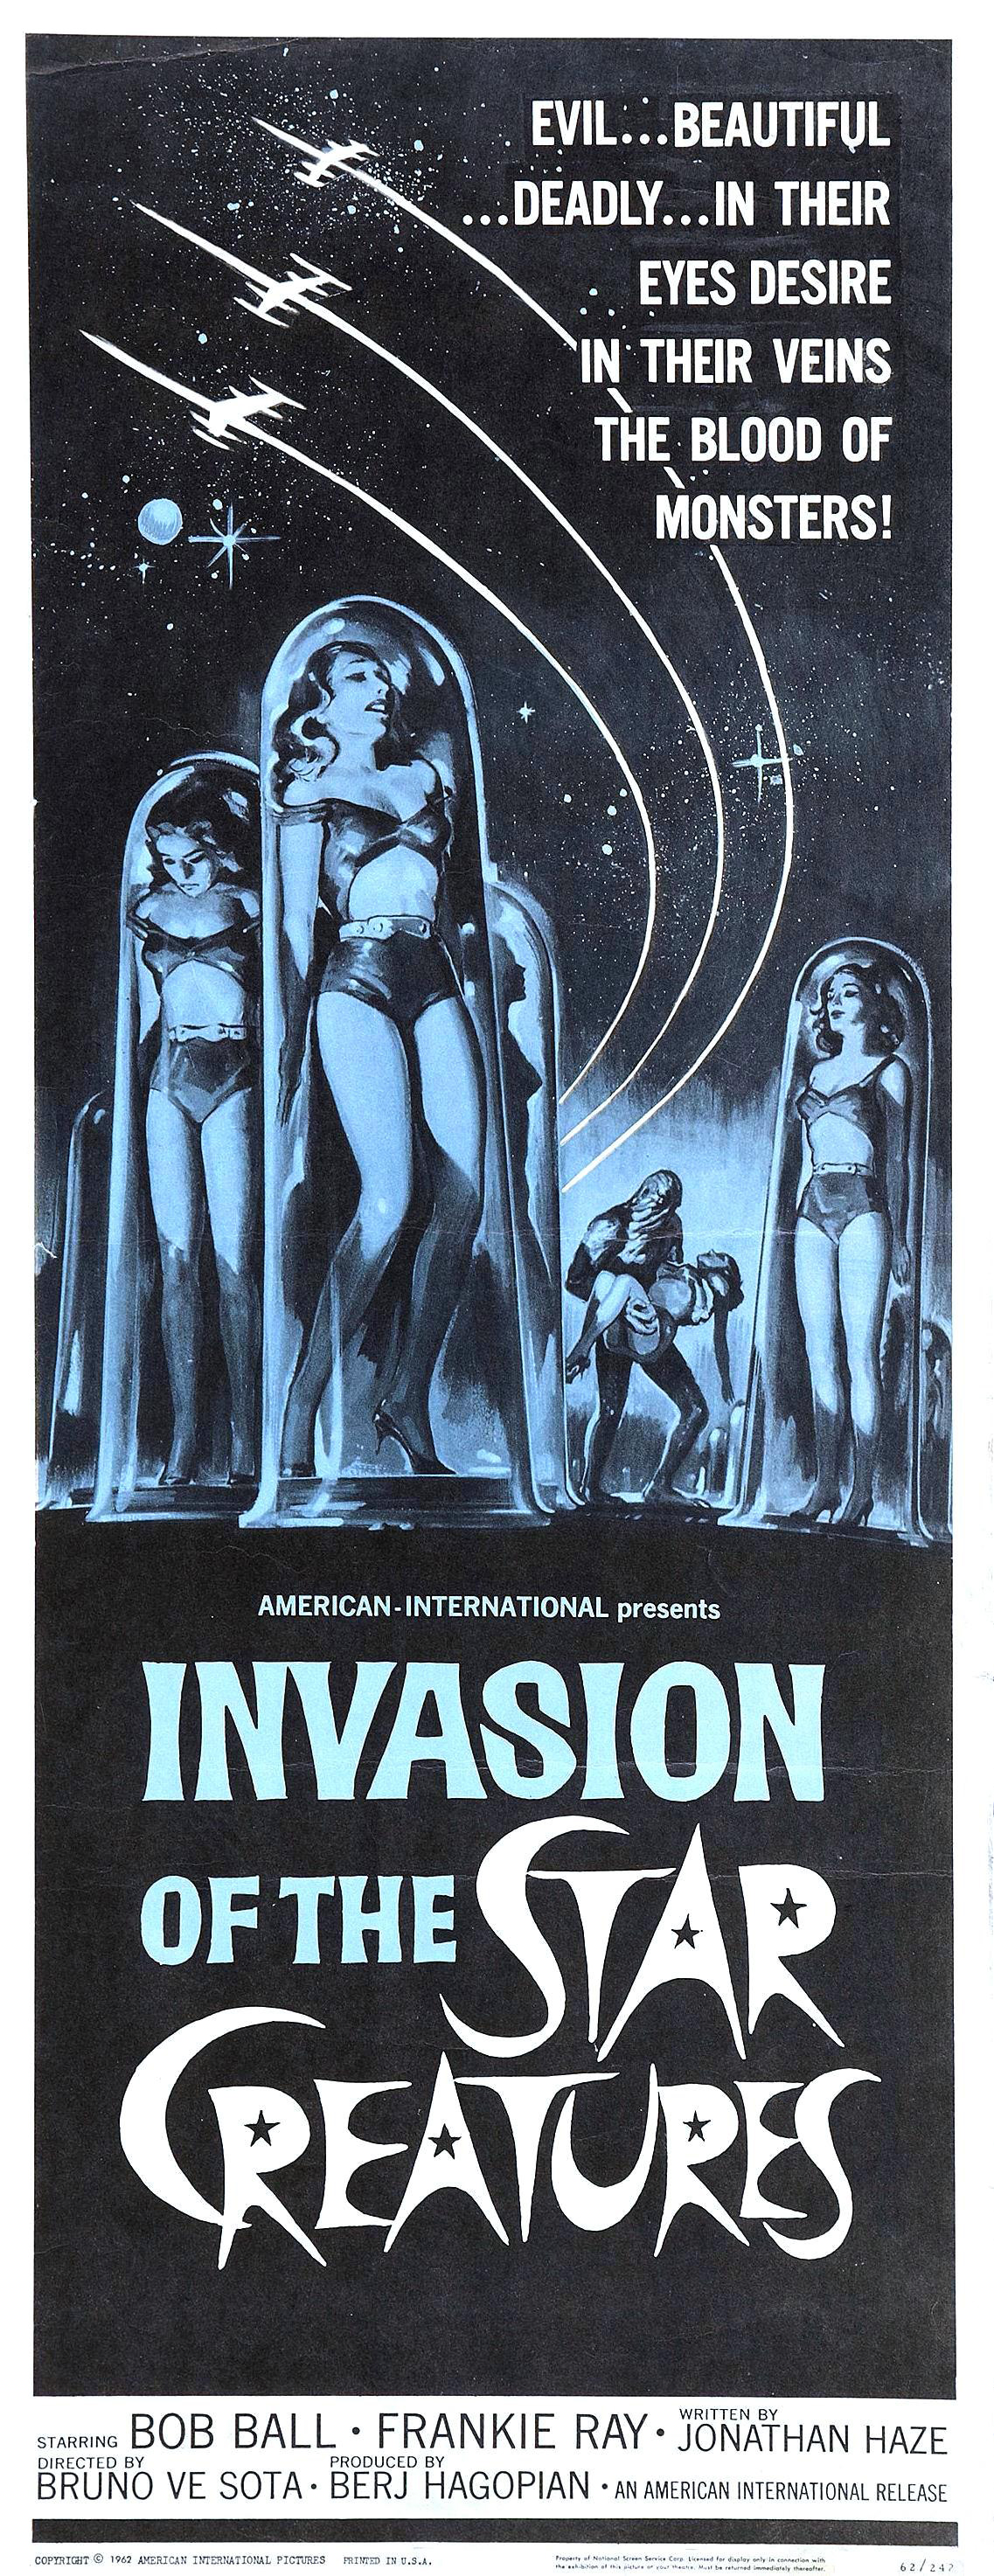 Invasion of the Star Creatures (1963)